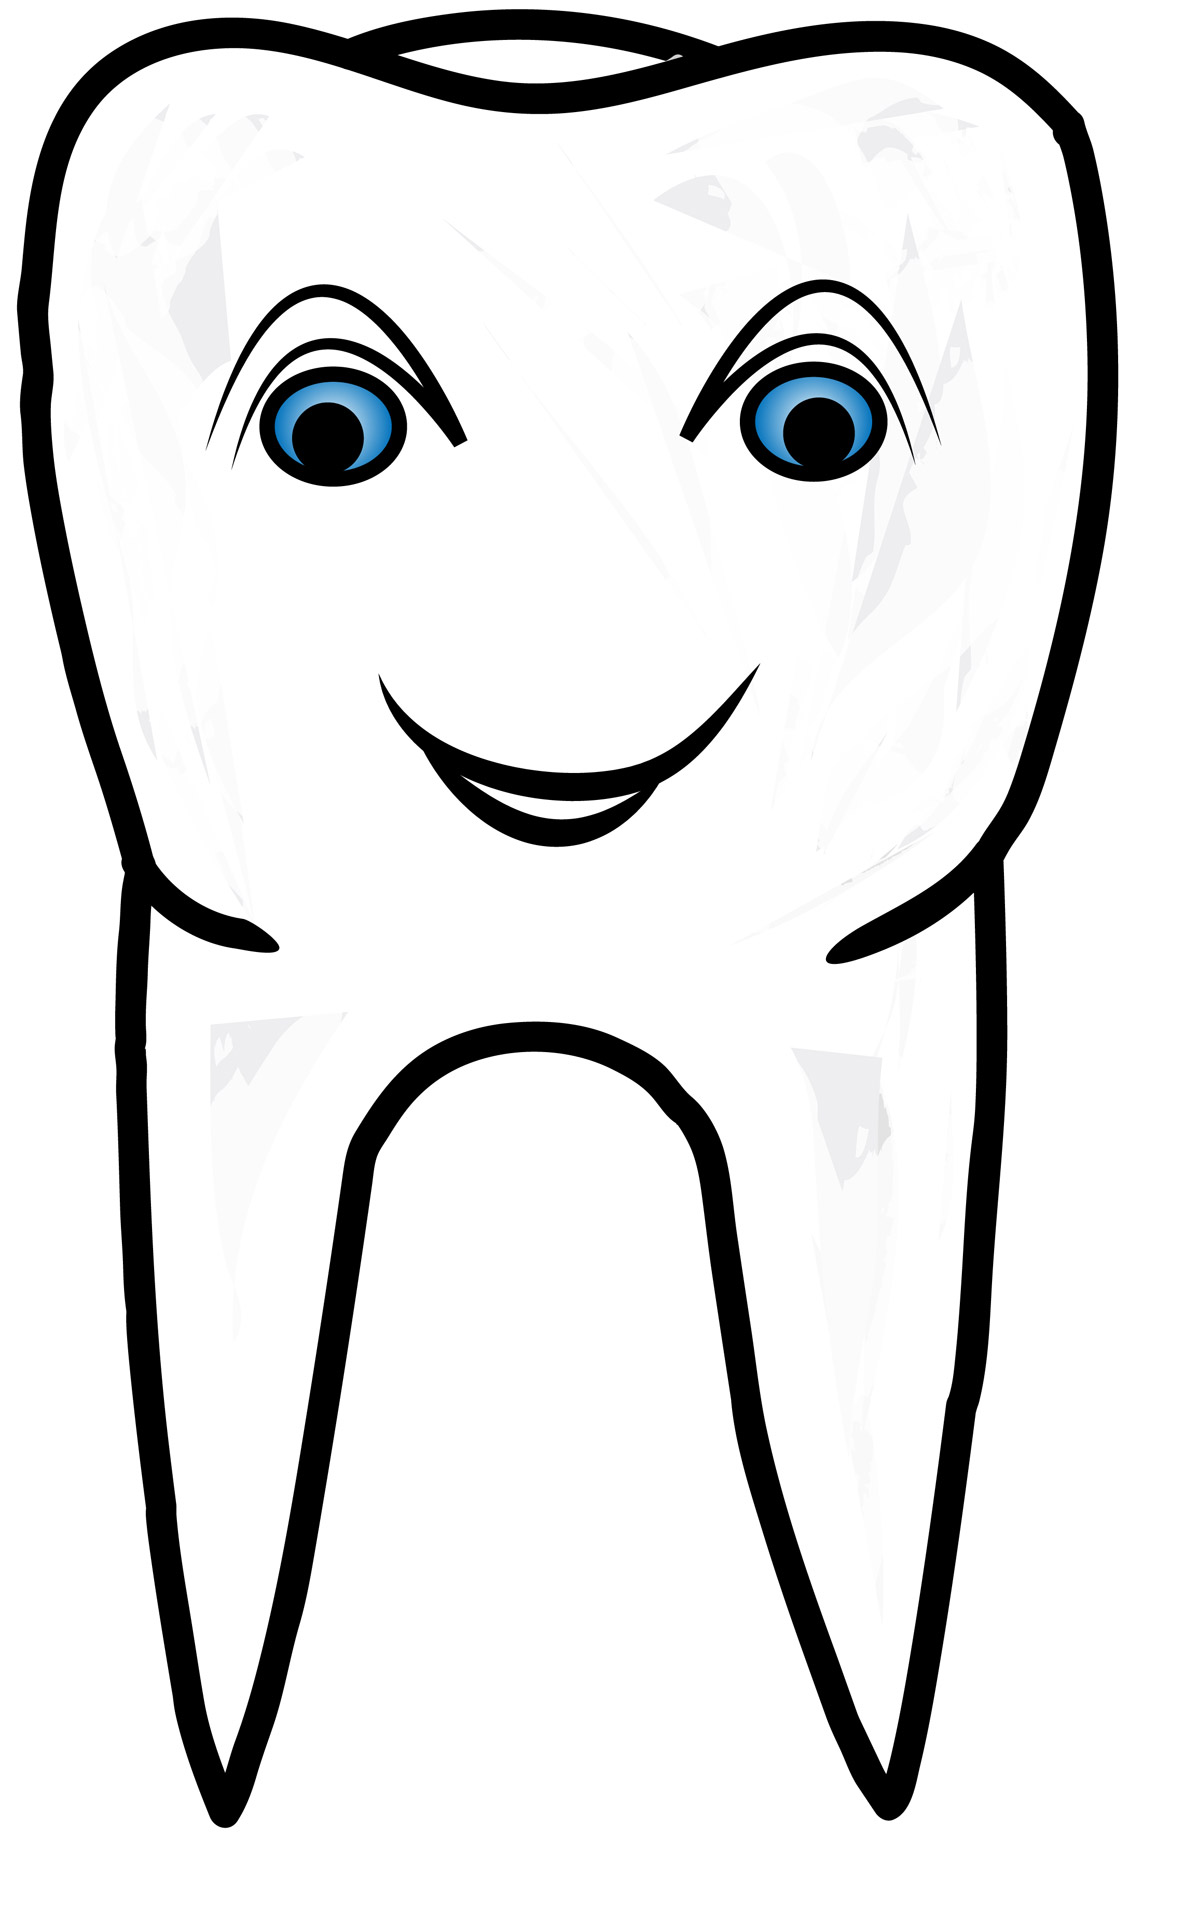 Stylized Vector Painted Smiling Healthy Tooth